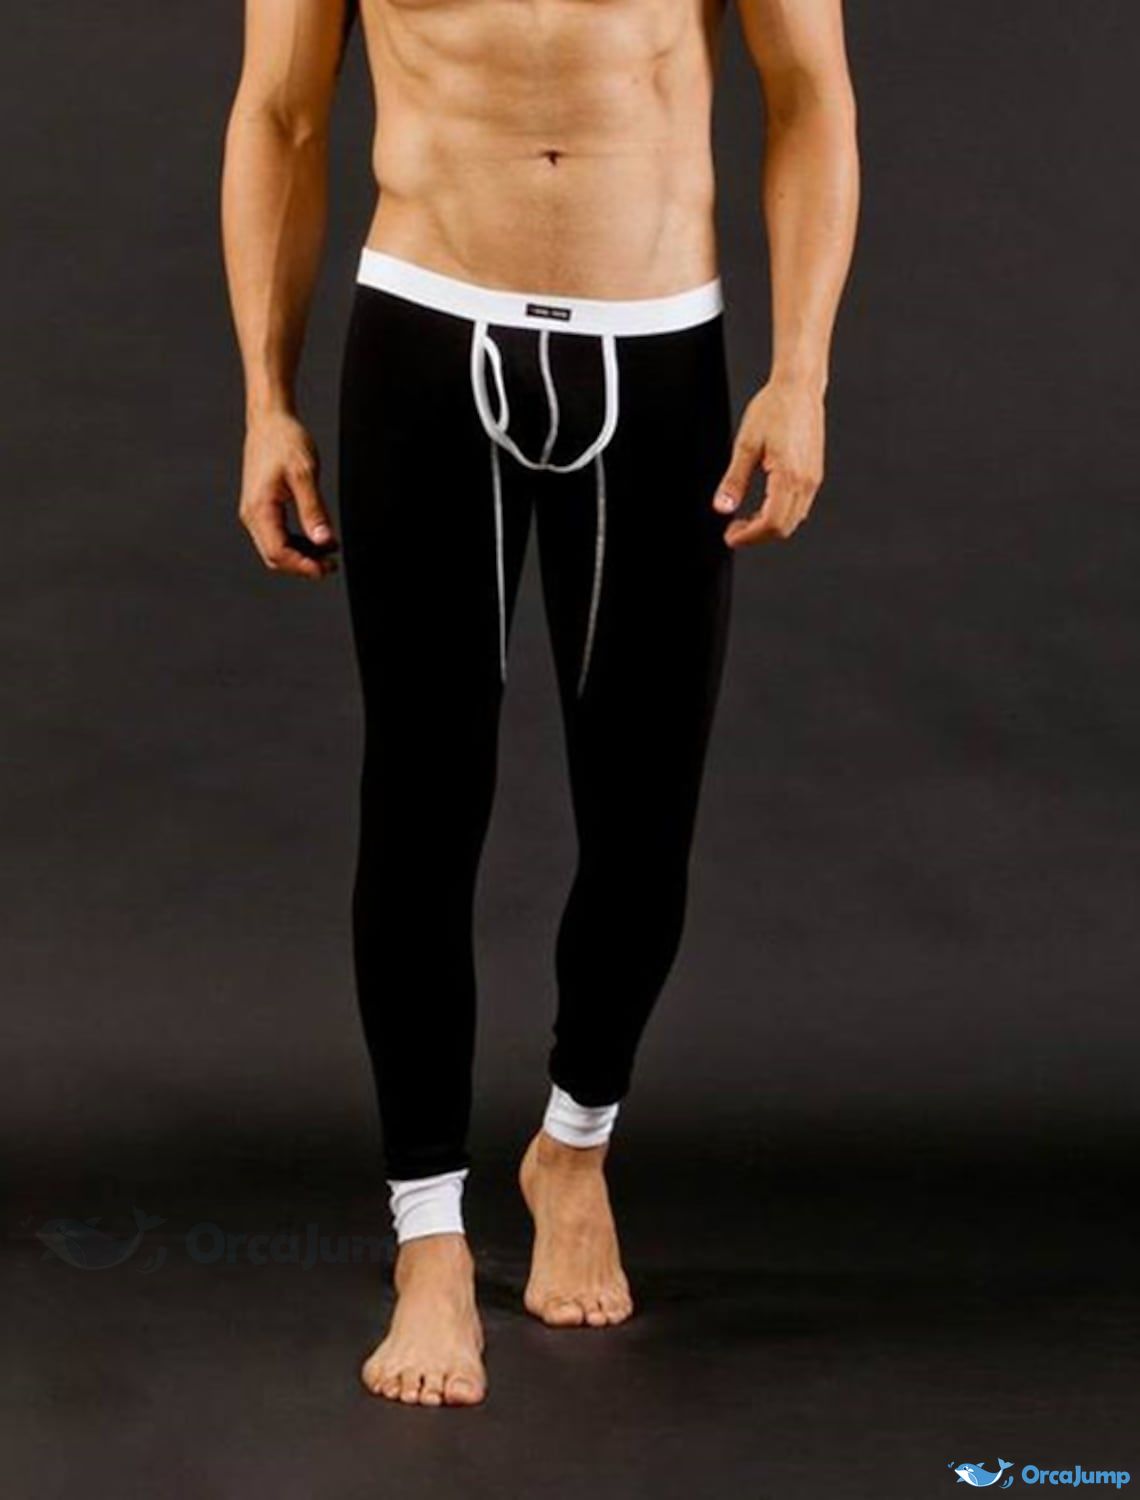 OrcaJump - Mens Sexy Low Waist Modal/Spandex Long Johns Thermal Underw